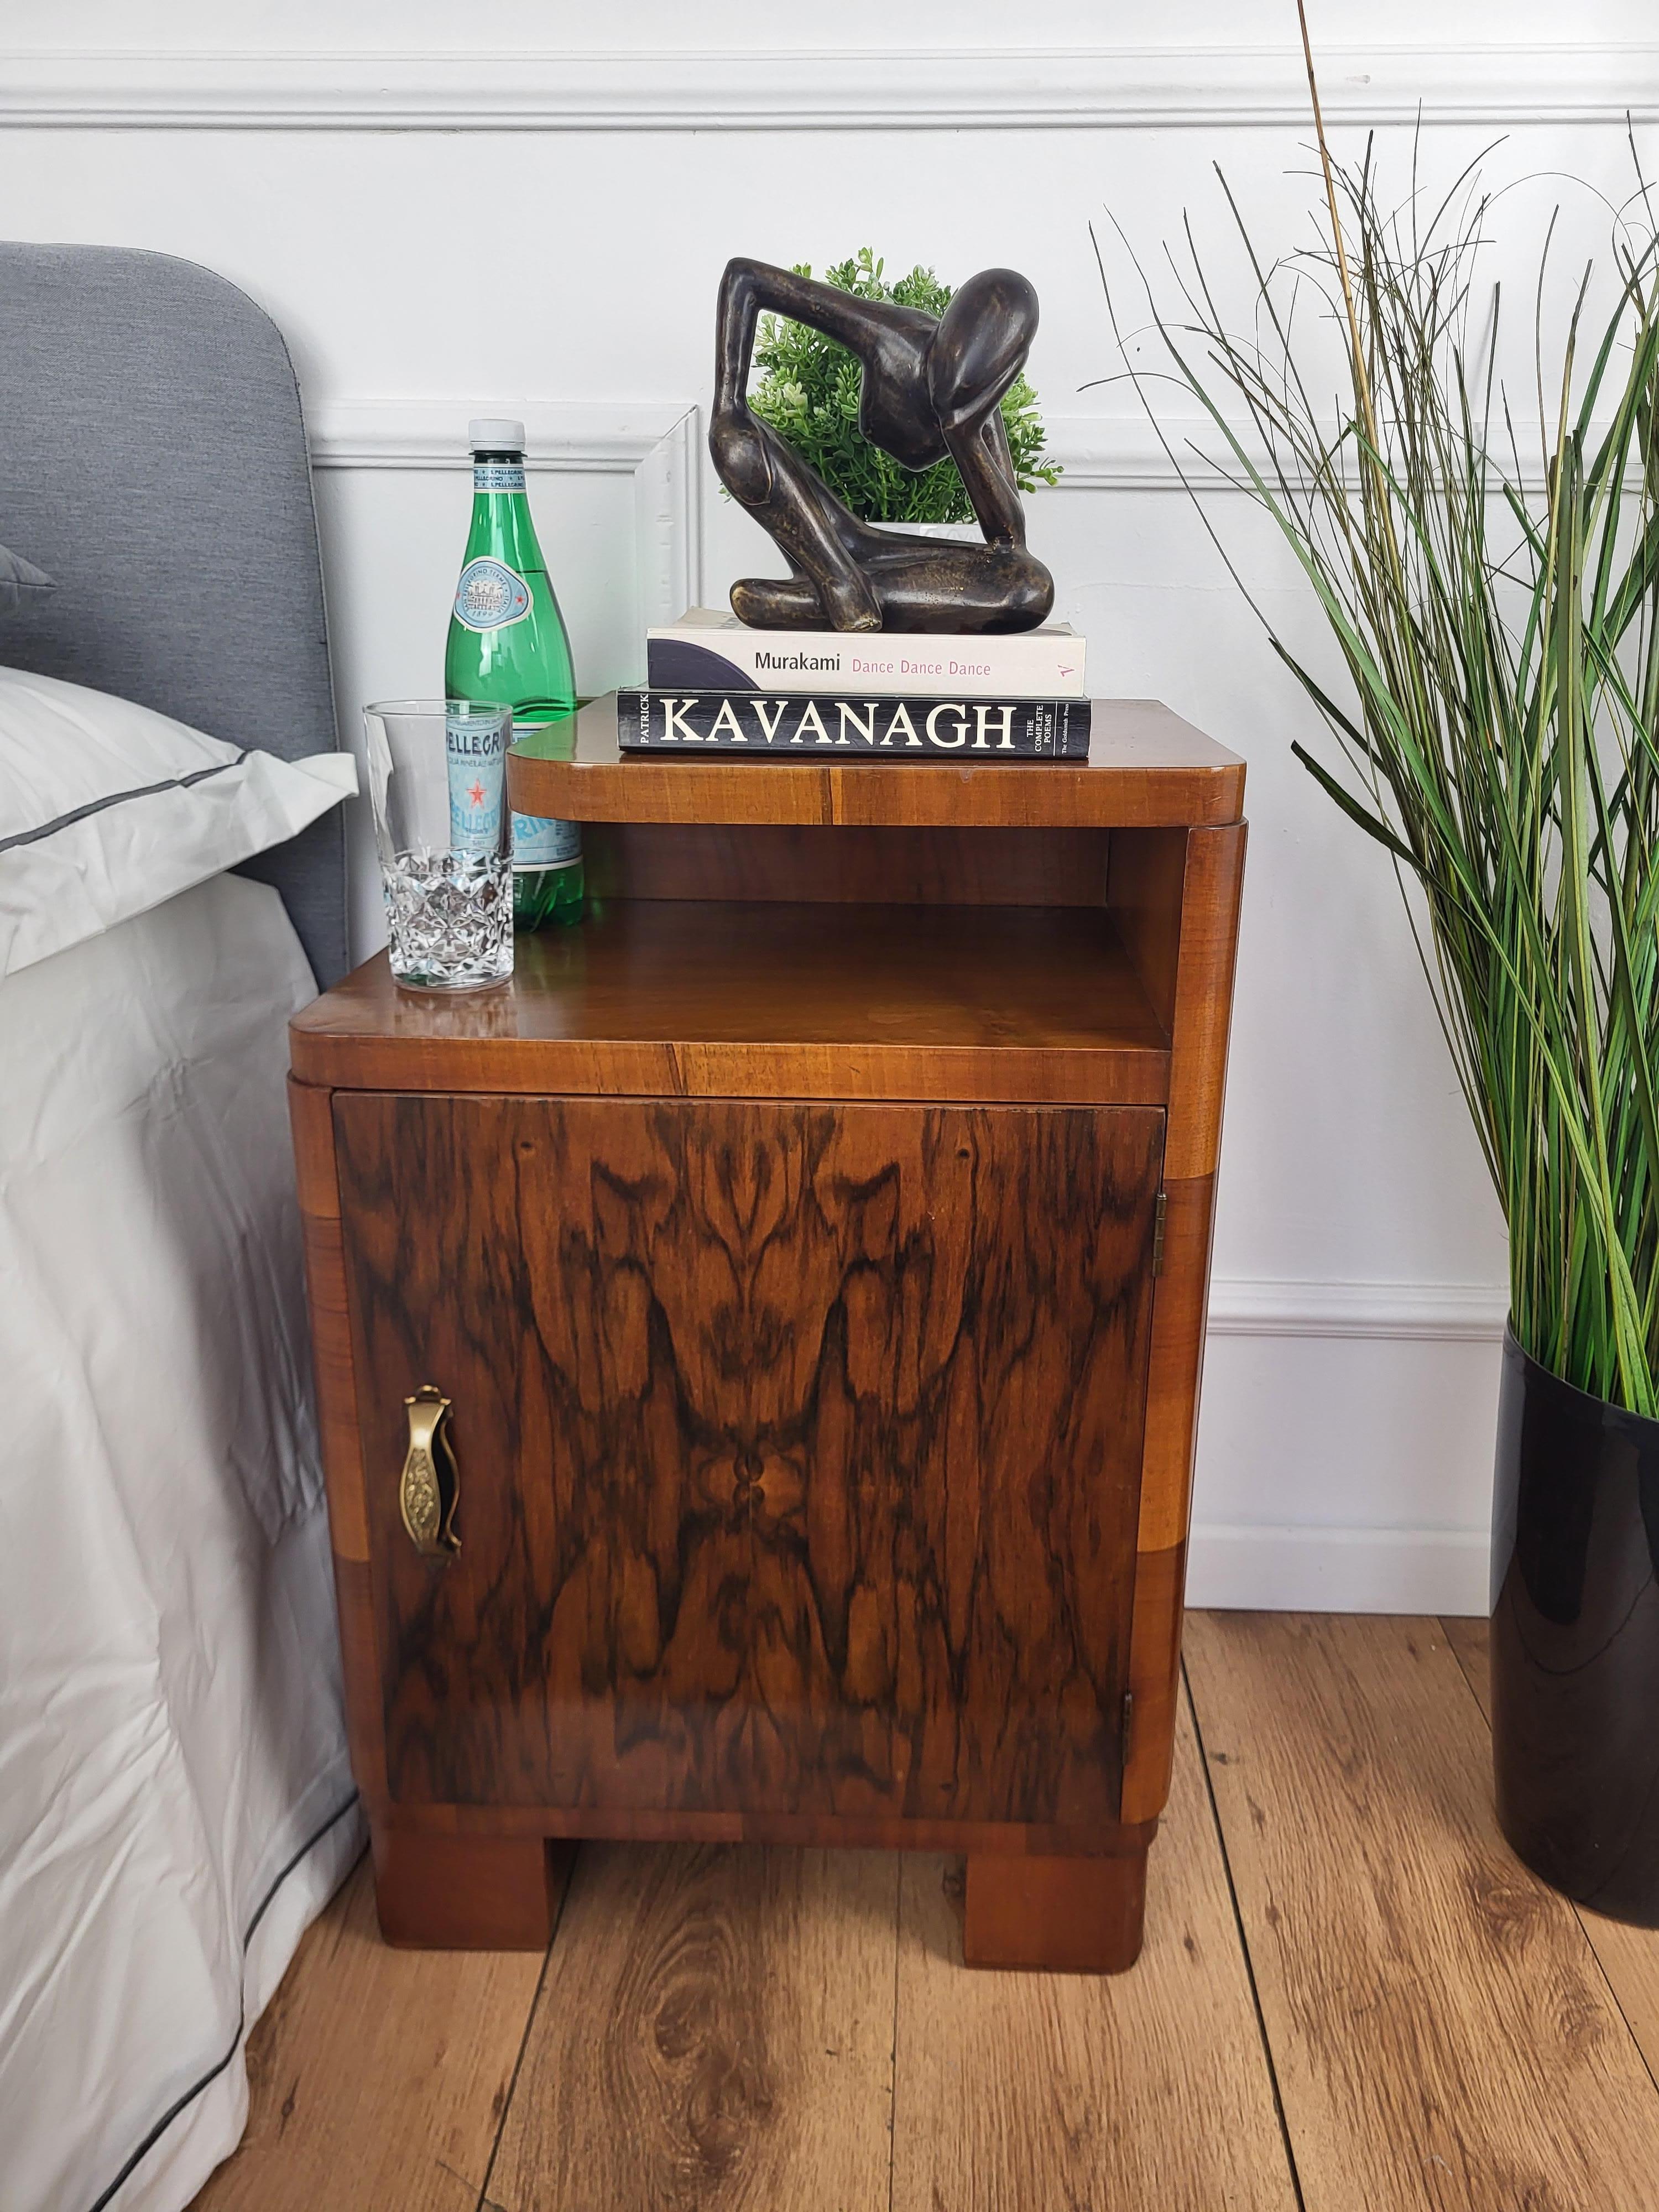 Very elegant and refined pair of Italian 1940s Art Deco bedside tables with great design shape and decors in veneer burl walnut briar wood, double shelf and door. This night stands make a great look in any style bedroom, as a complementary design